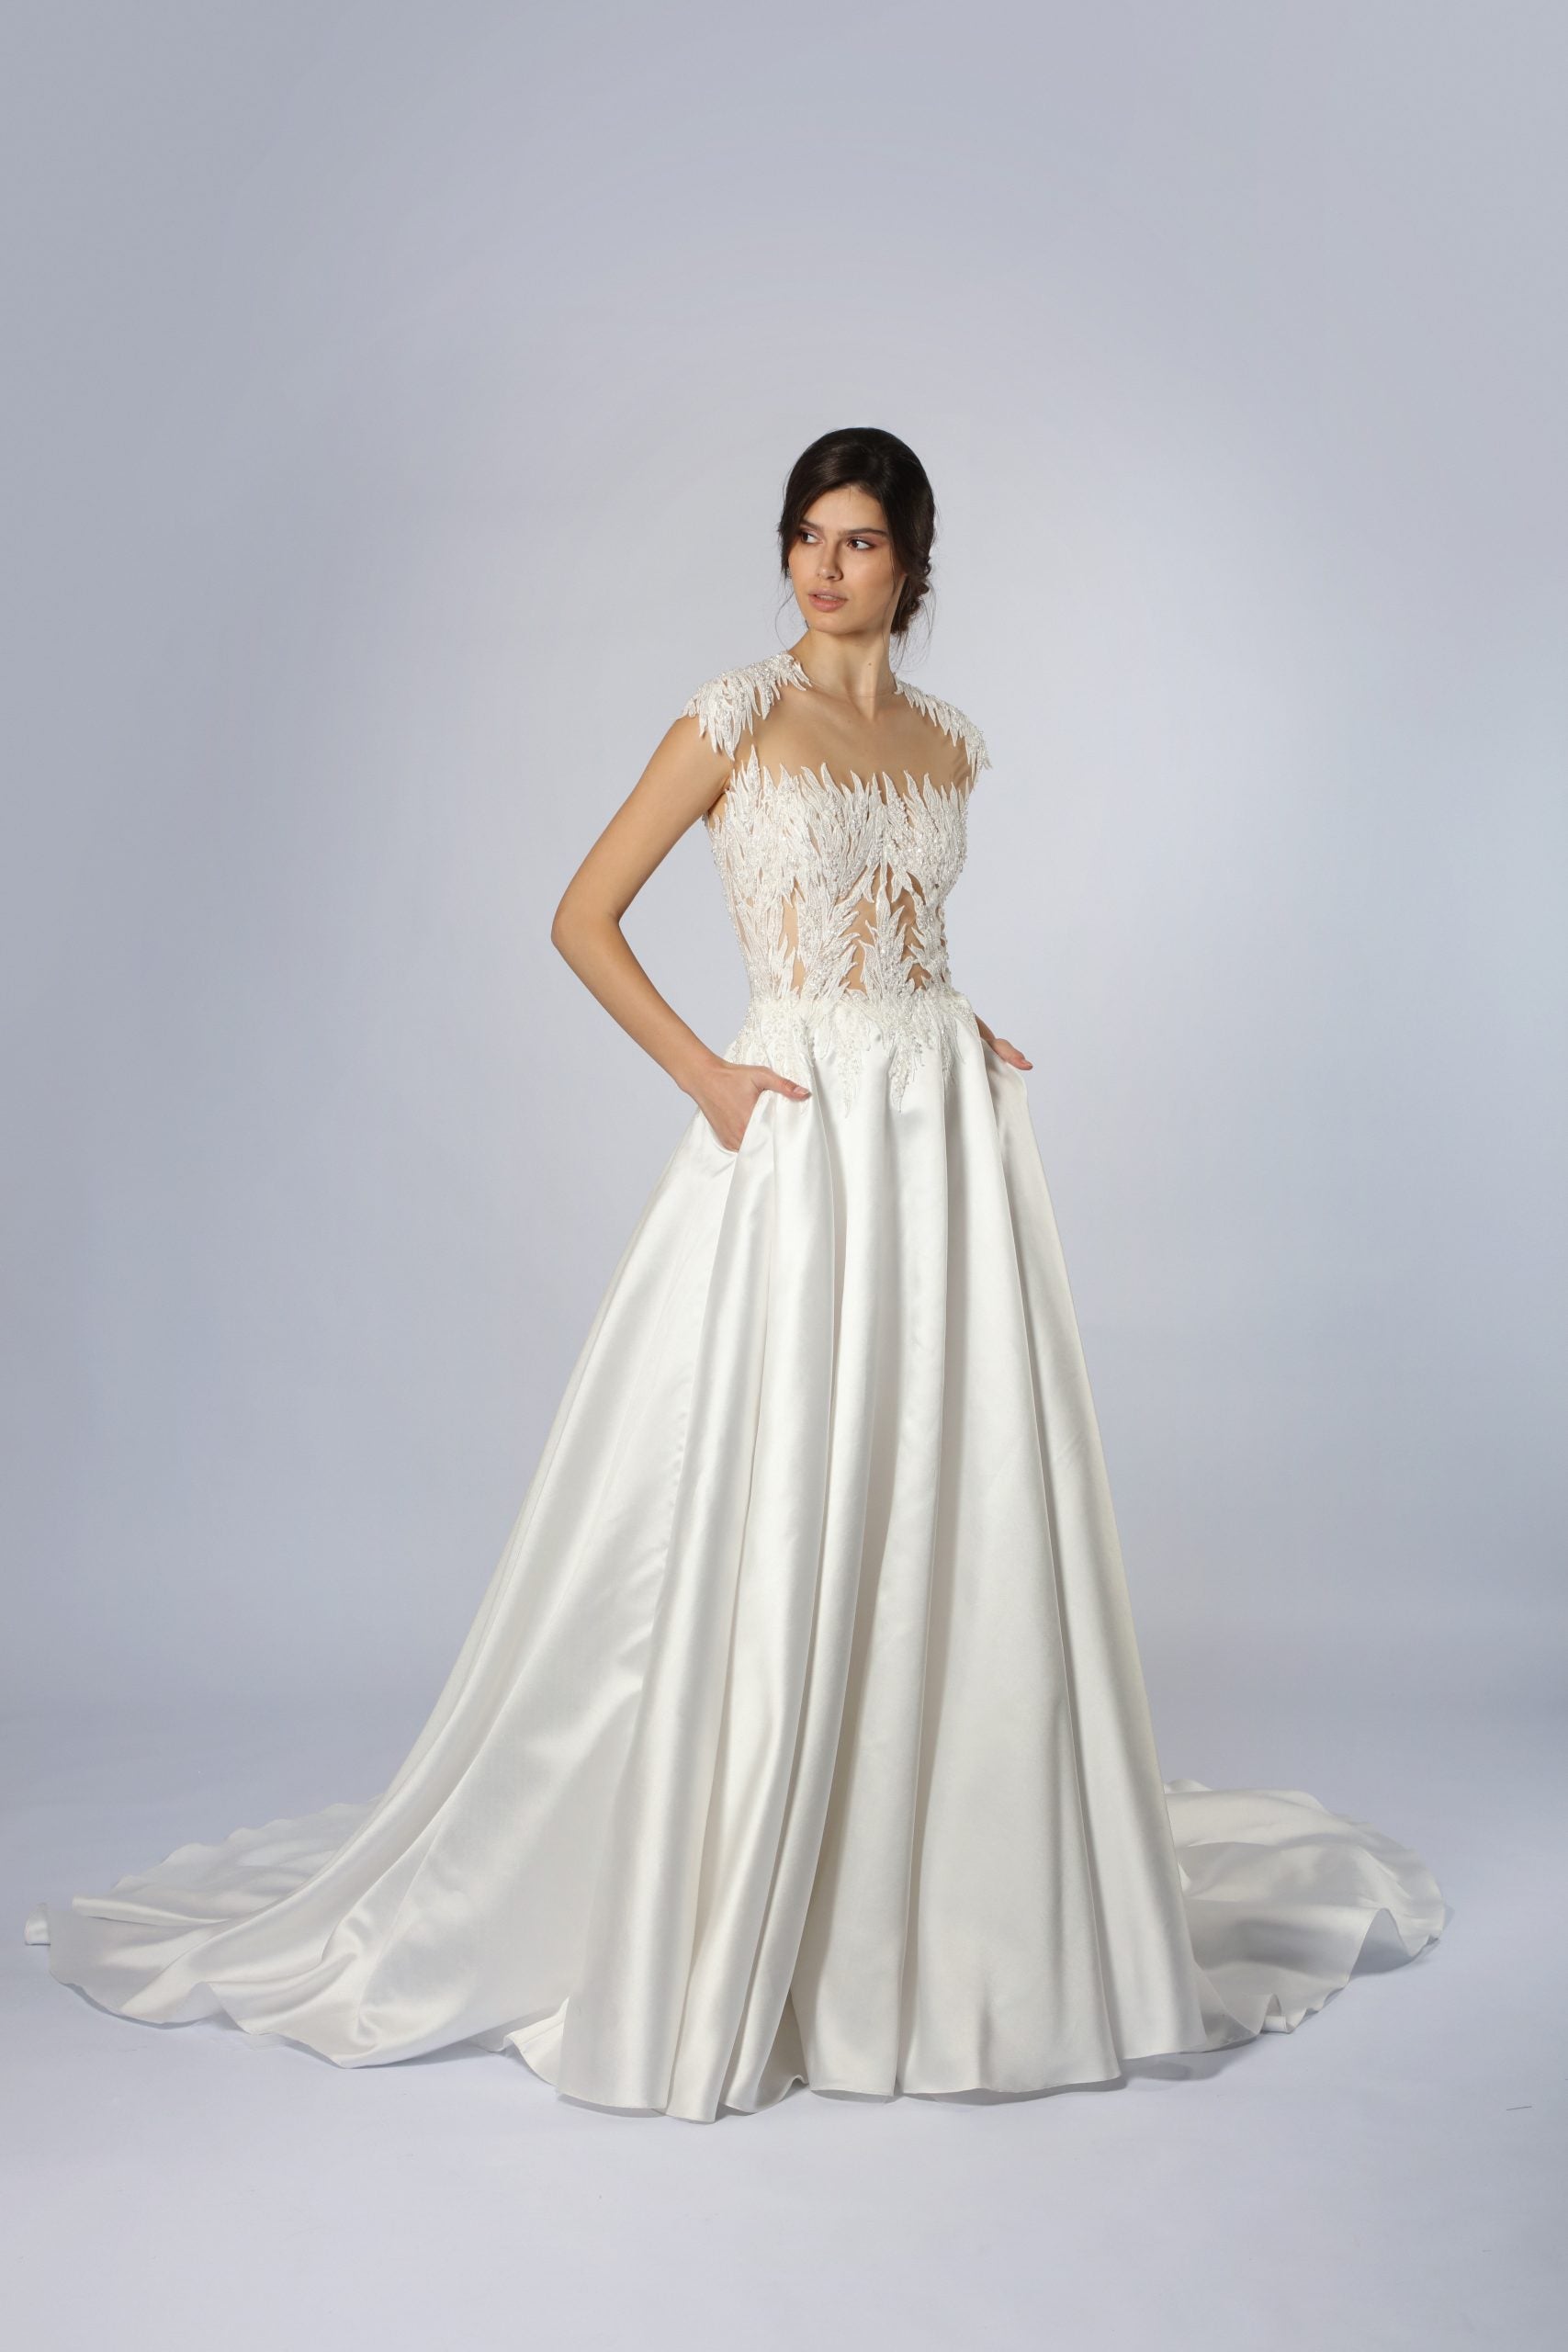 Embroidered Illusion A-Line Gown by Tony Ward - Image 1